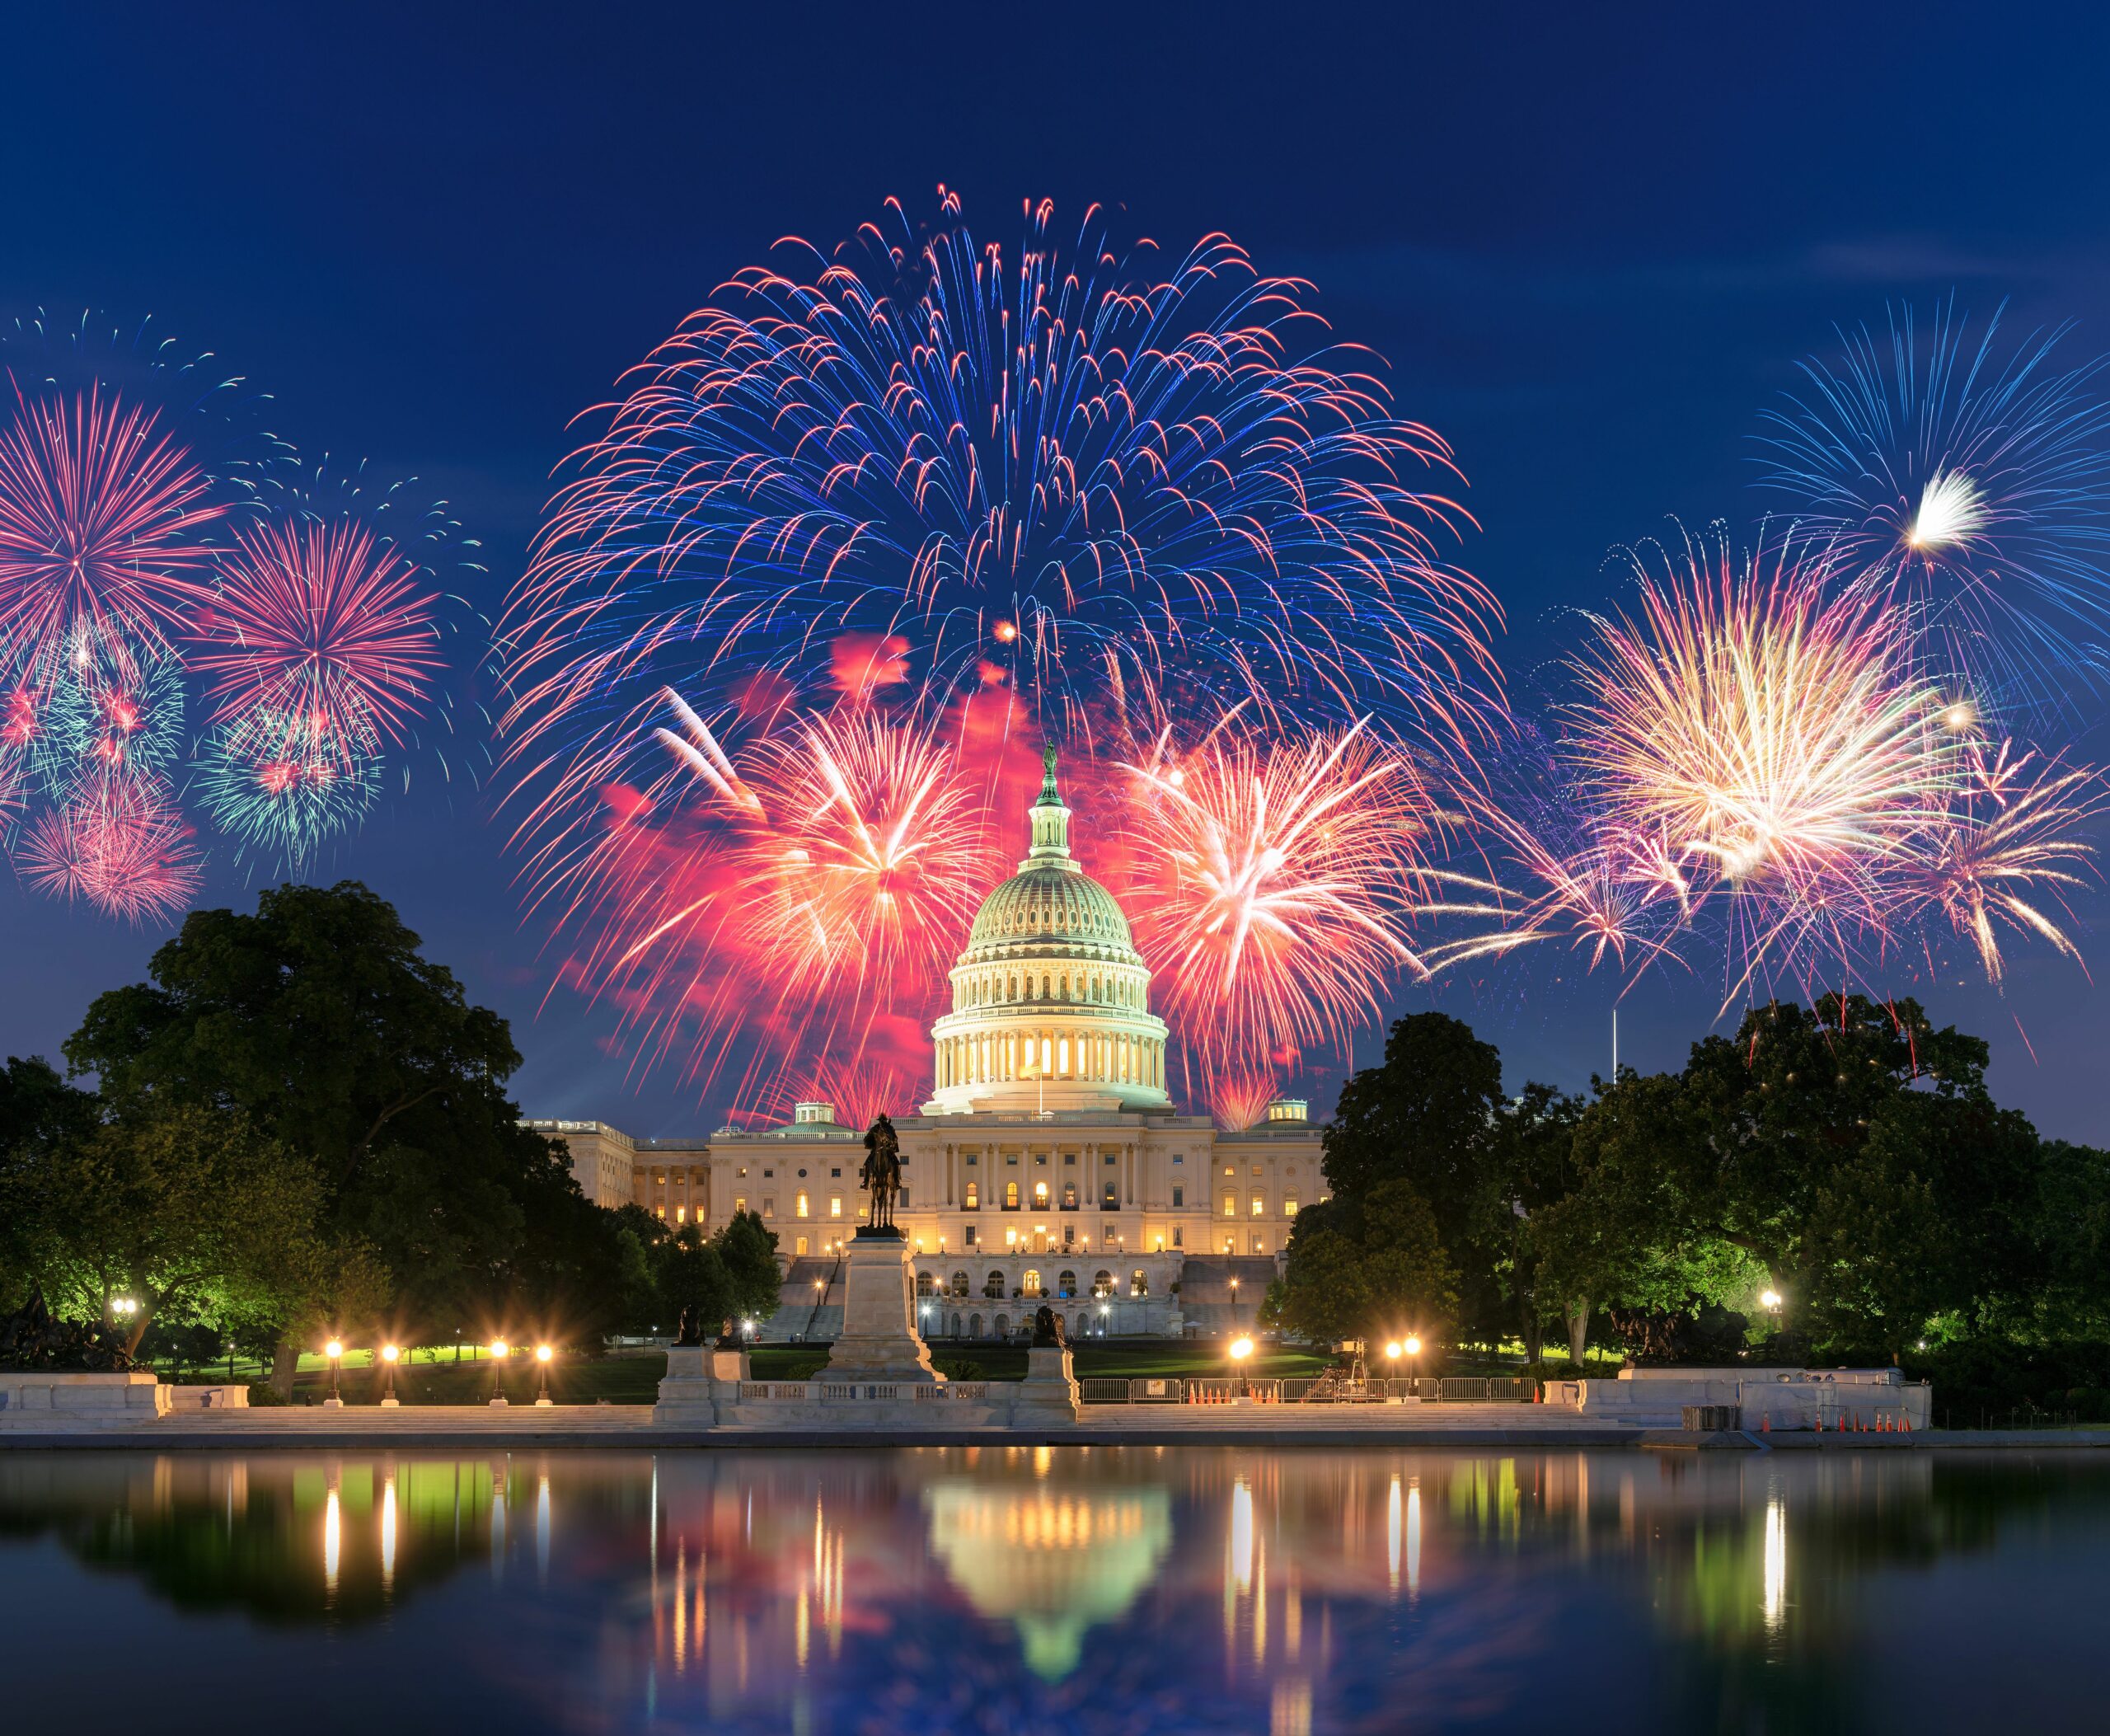 Fireworks over the U.S. Capitol in A Capitol Fourth.